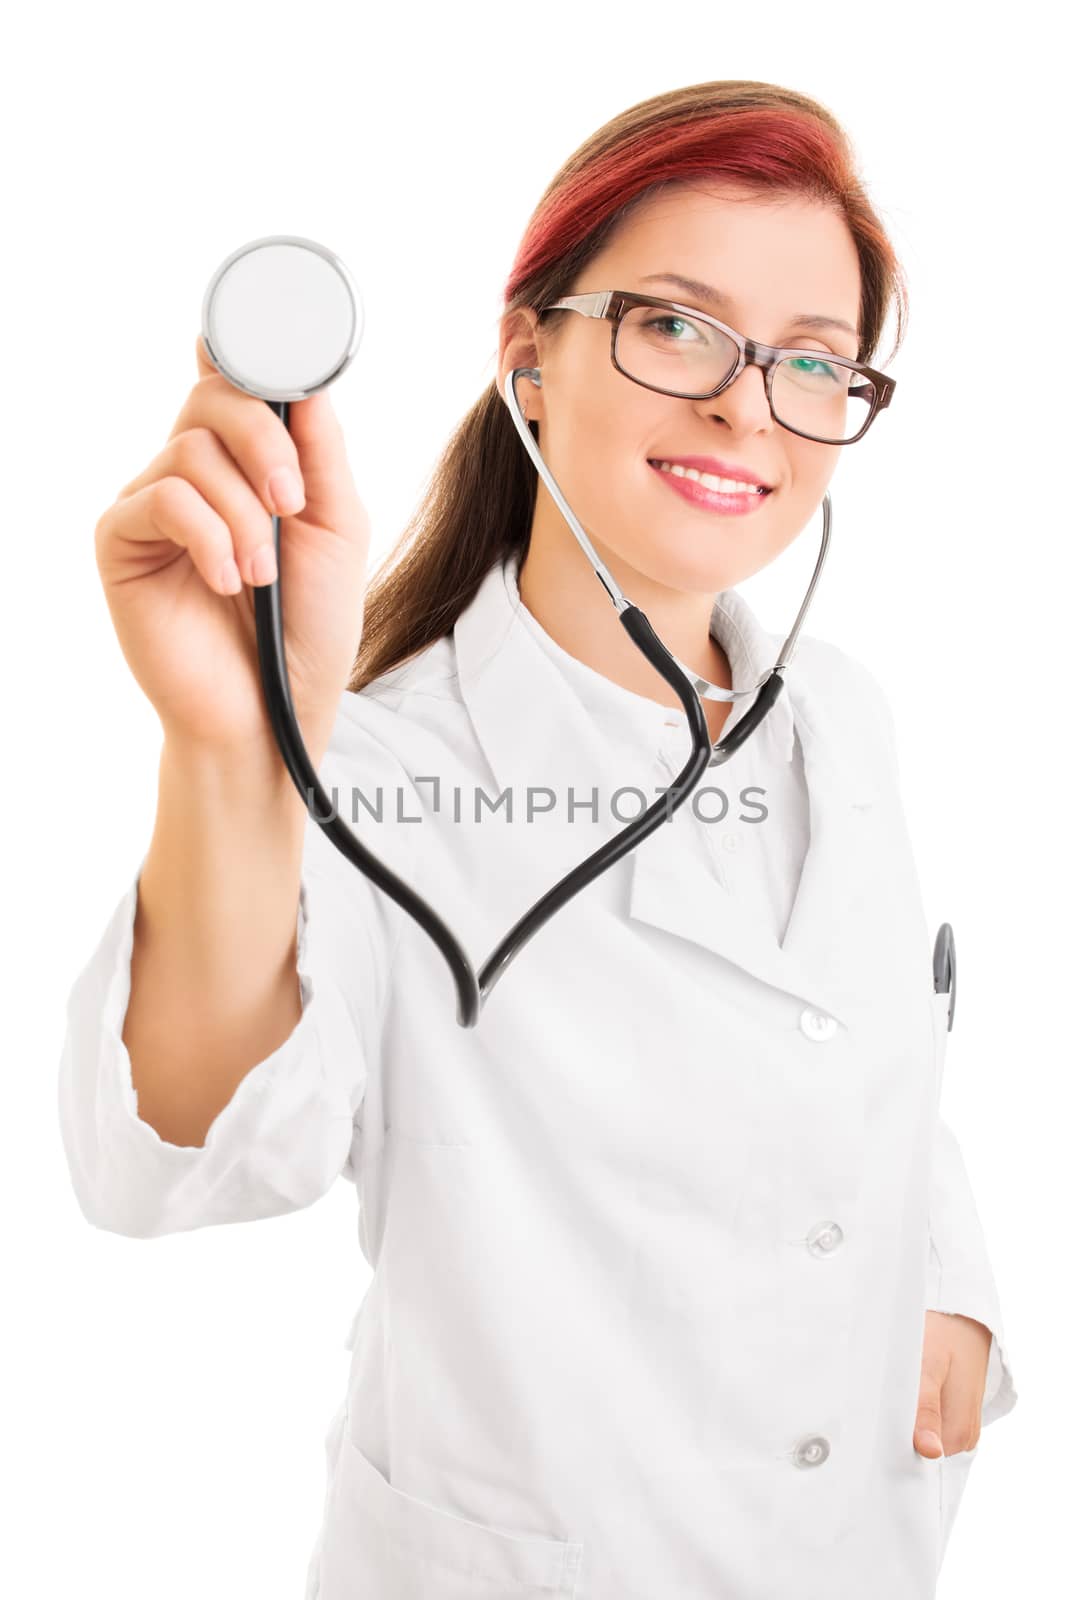 Smiling young doctor listening through stethoscope by Mendelex